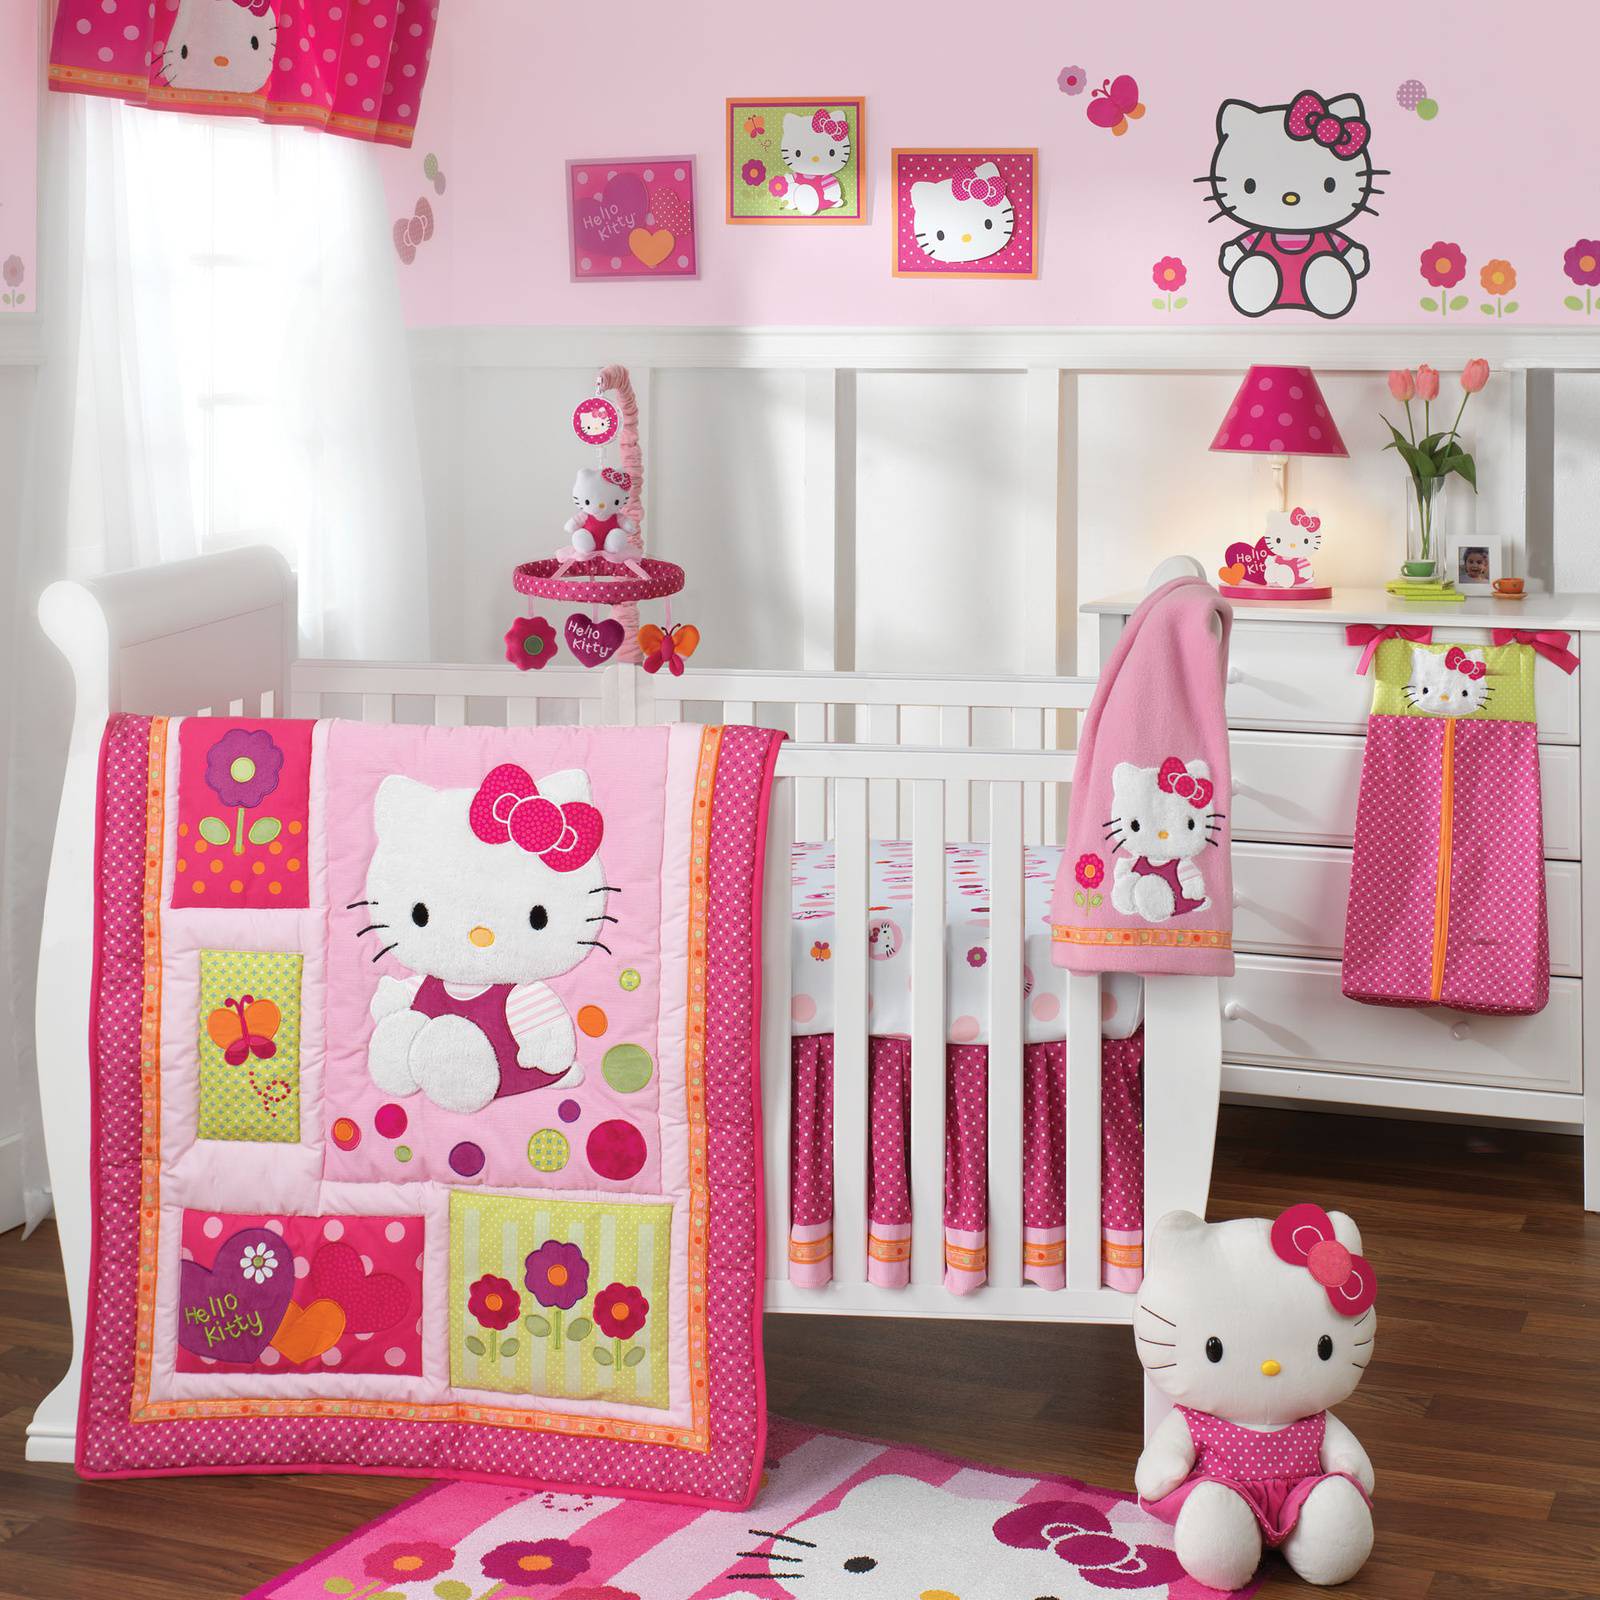 Cute Baby Bedroom With Hello Kitty DesignDollBlanketPictureWhite Baby NurseryToysLampHand Wipes FlowerRugChest Of Drawer White Wall And Laminated Wooden Floor Bedroom